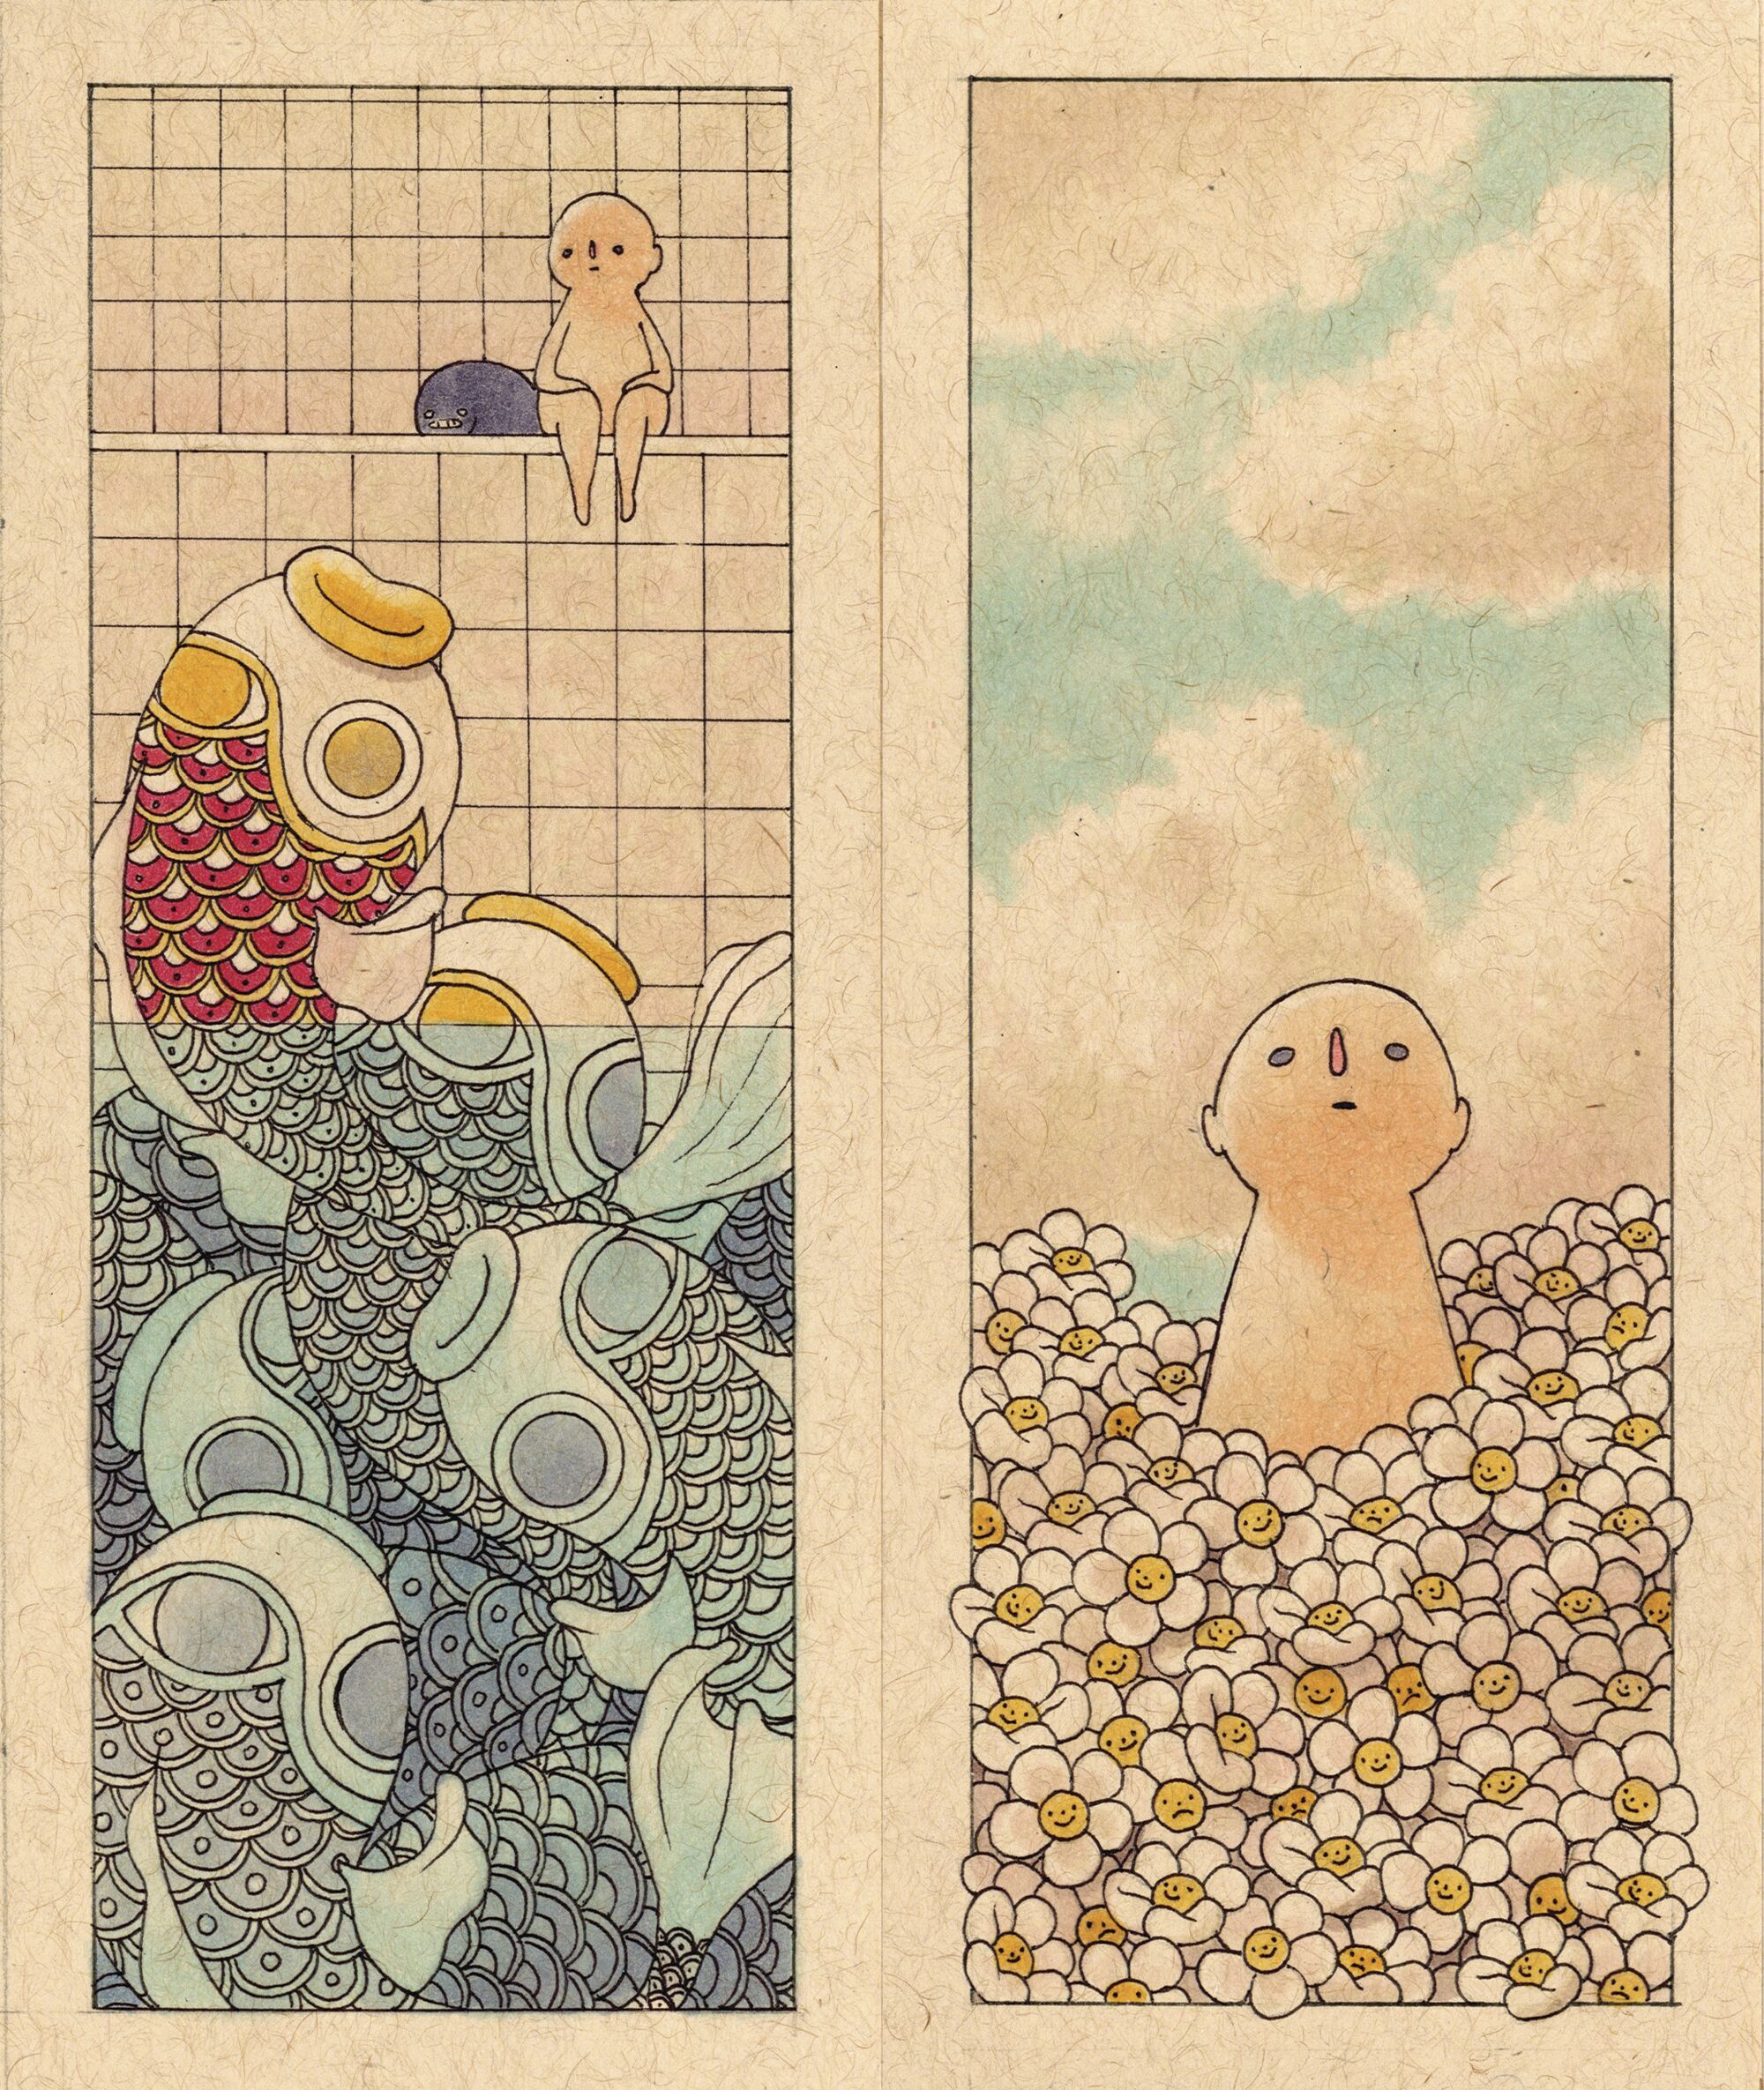 Illustrations of a seated person above a Japanese-style fish and a person in a field of daisies.